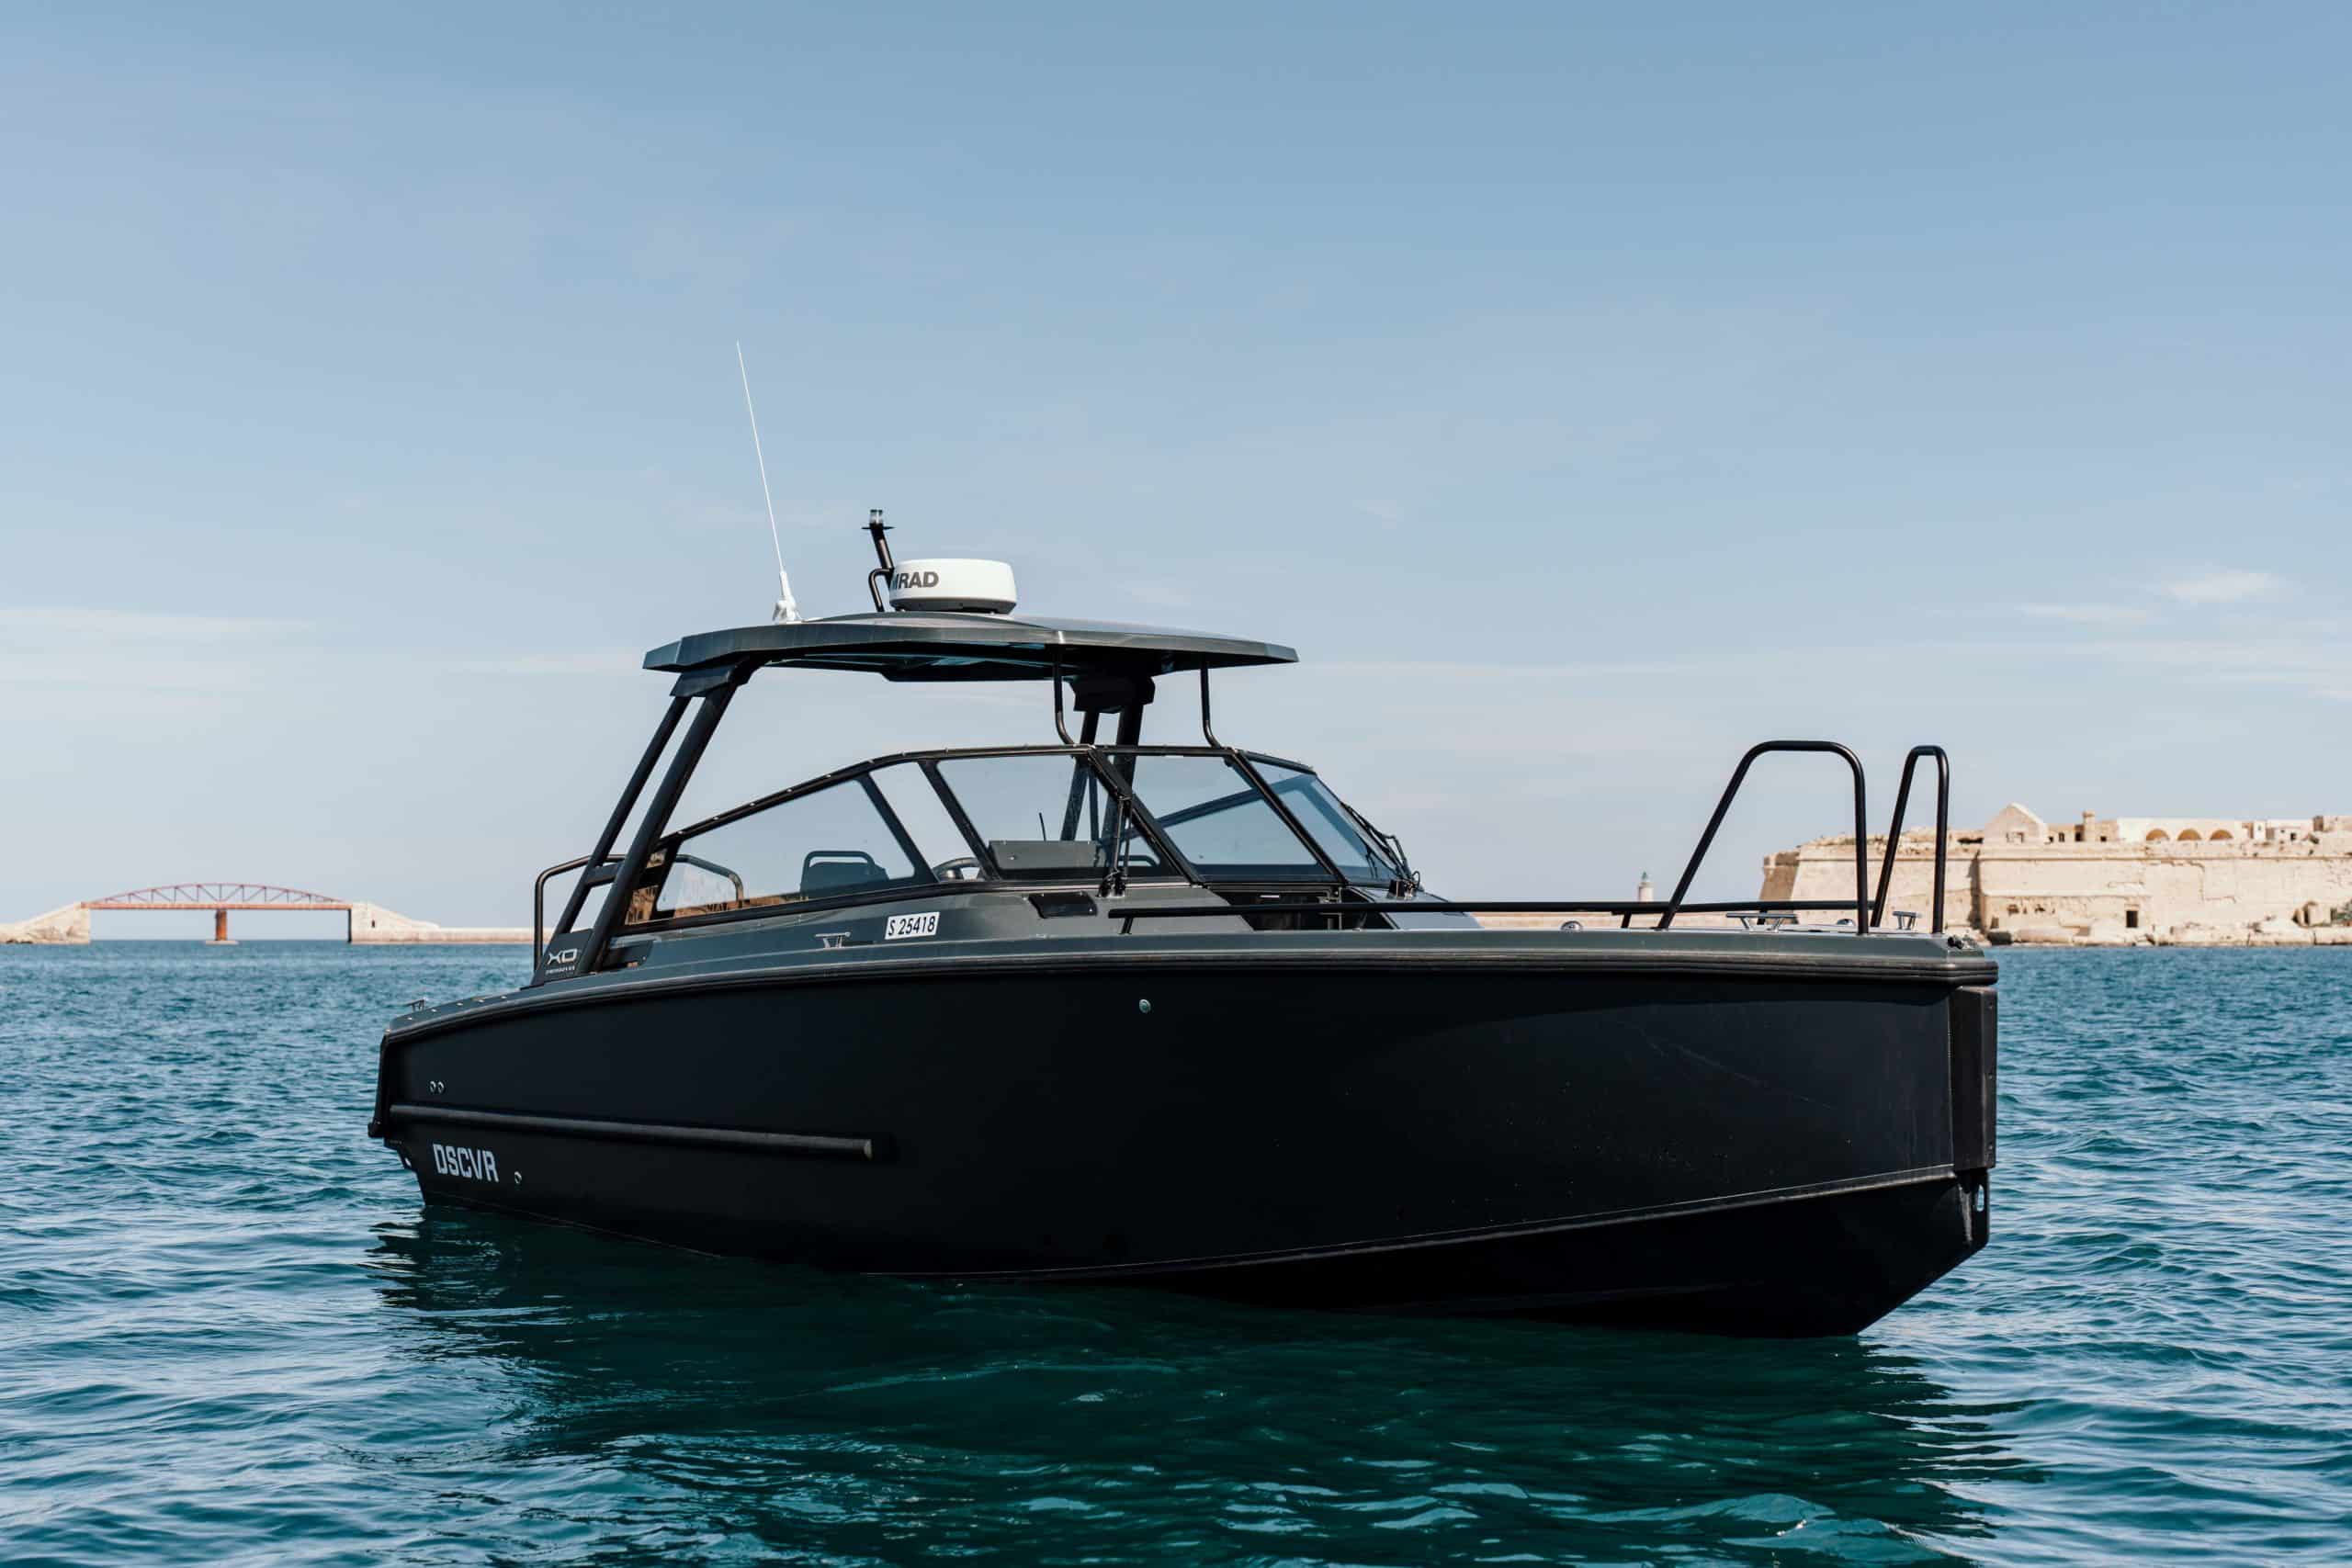 Thumbnail of http://Image%20of%20XO%20DSCVR%209%20T-top%20Black%20boat%20on%20the%20water%20with%20a%20sporty%20and%20stylish%20design,%20featuring%20a%20T-top%20roof%20and%20ample%20seating%20space.